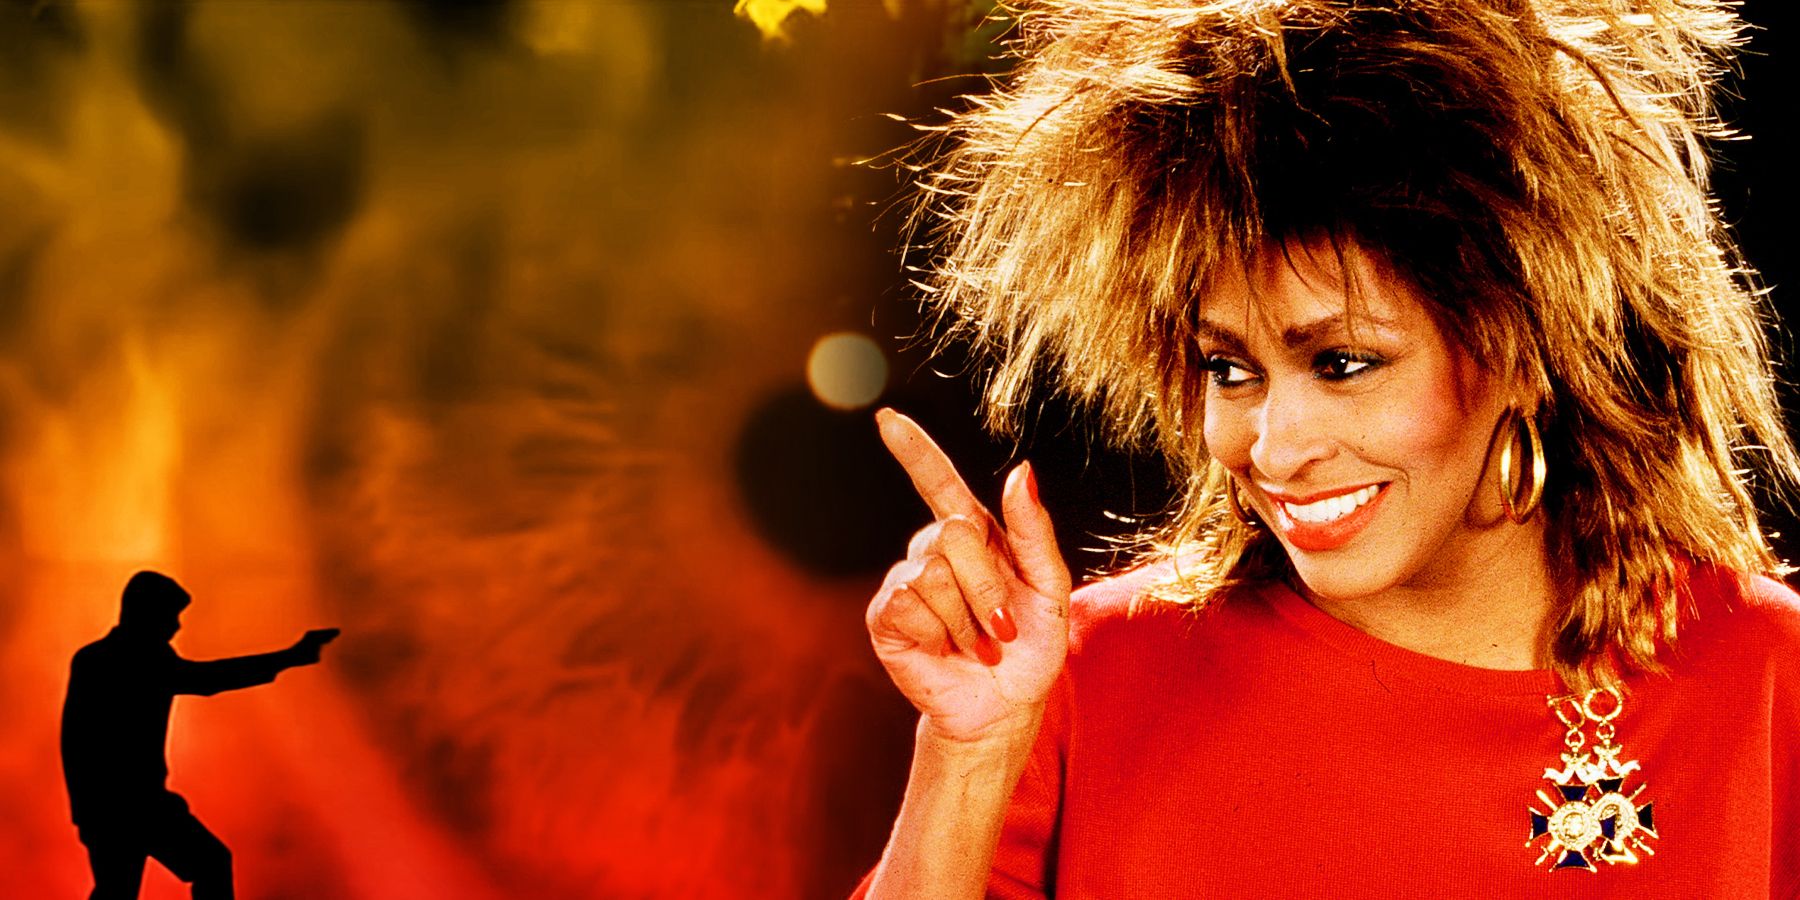 Tina Turner's James Bond Theme Was Just What 007 Needed